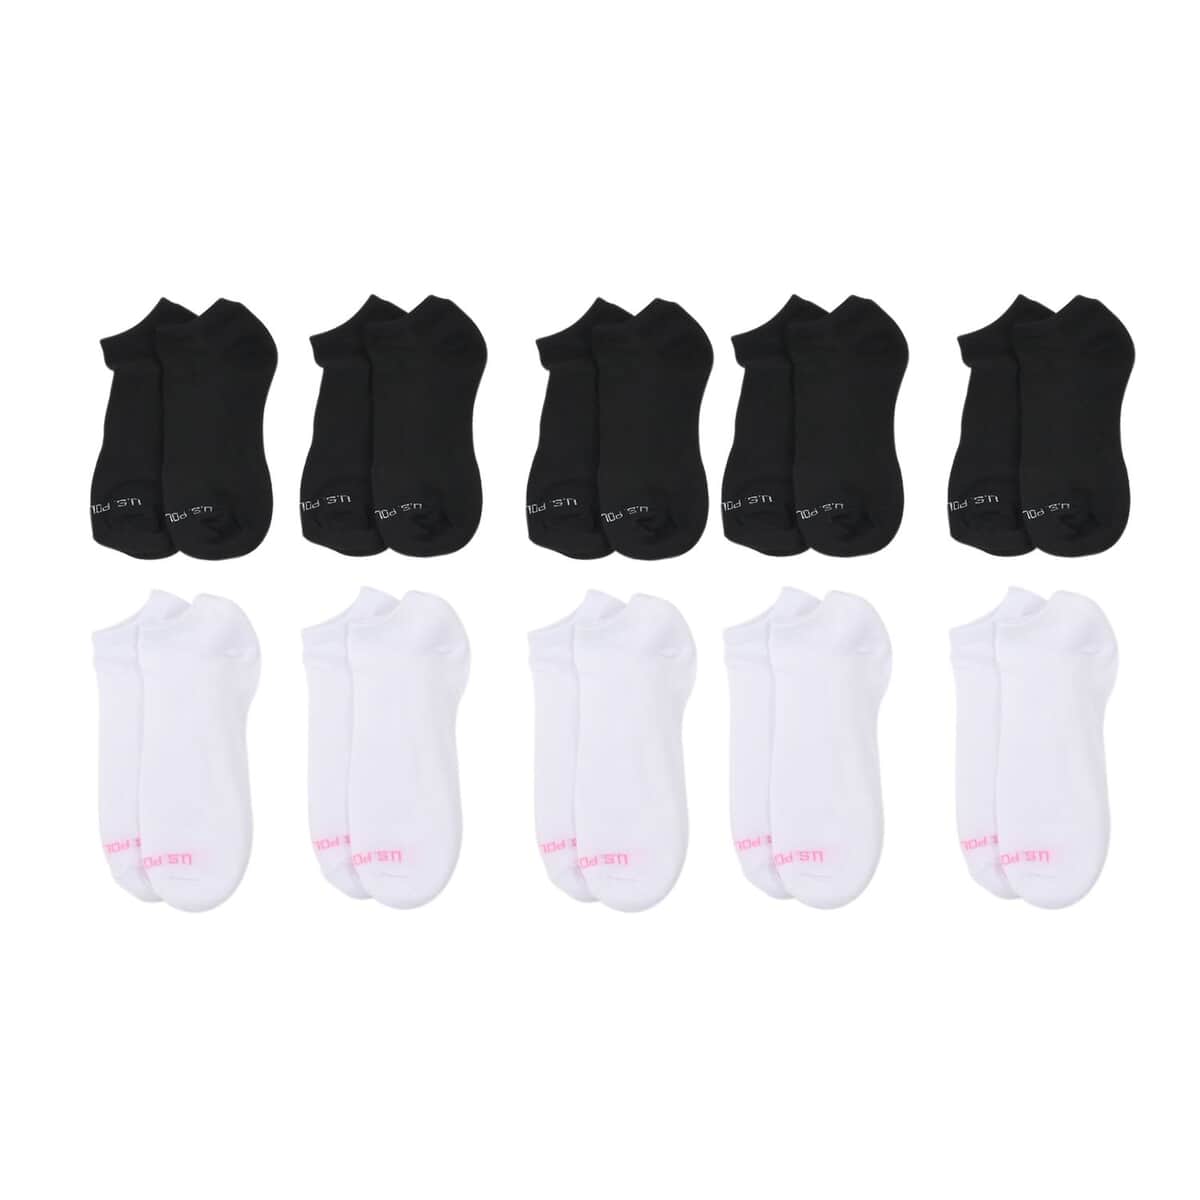 US POLO ASSN 10 Pairs Women's Low Cut Socks (Sizes 4-10) -White-Pink/Black image number 0